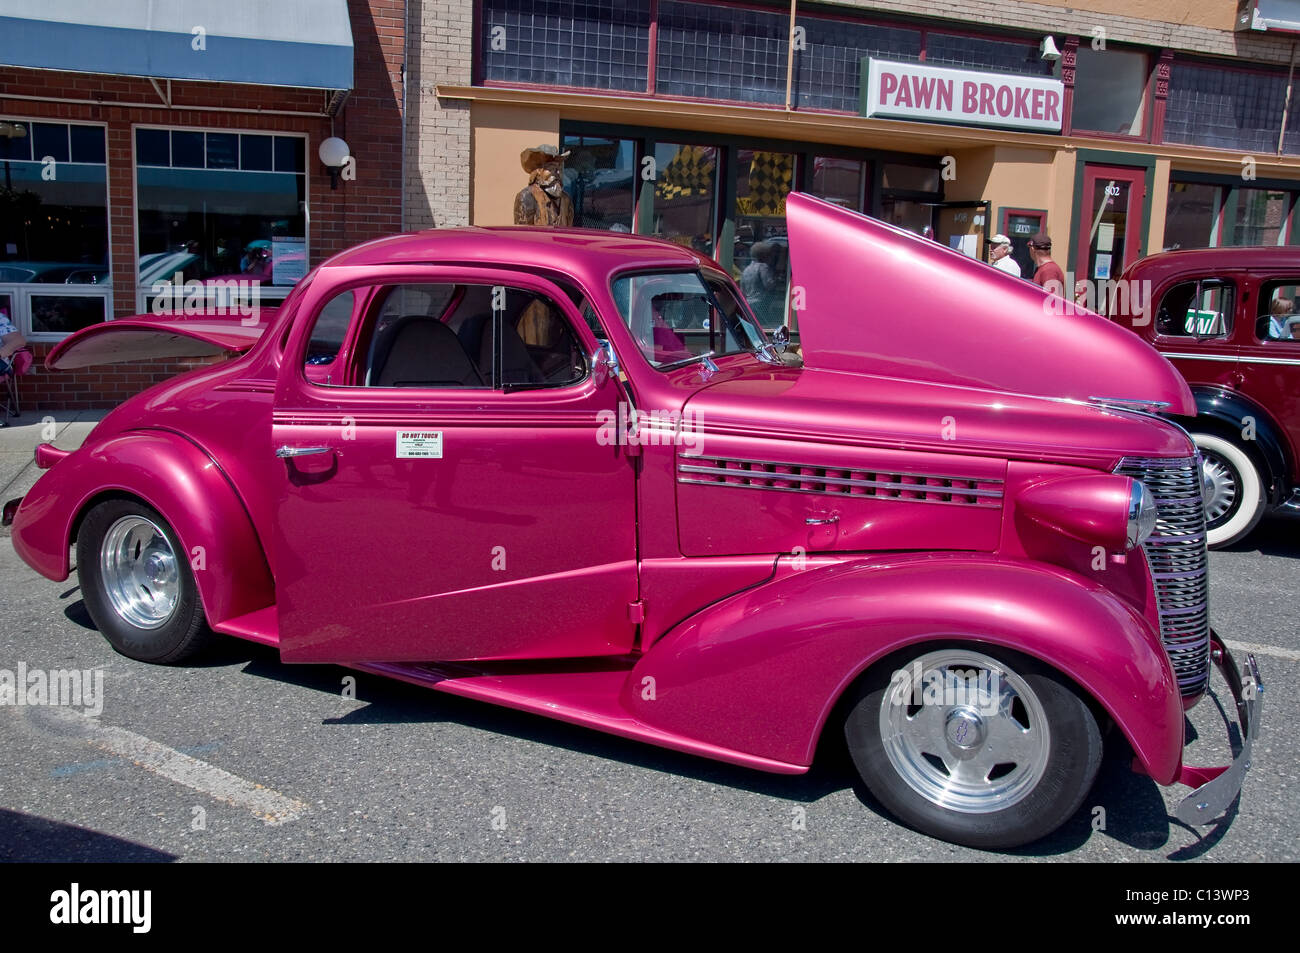 This restored vintage car a 1938 Chevrolet Coupe in a hot pink color was on display at a car show recently. Stock Photo